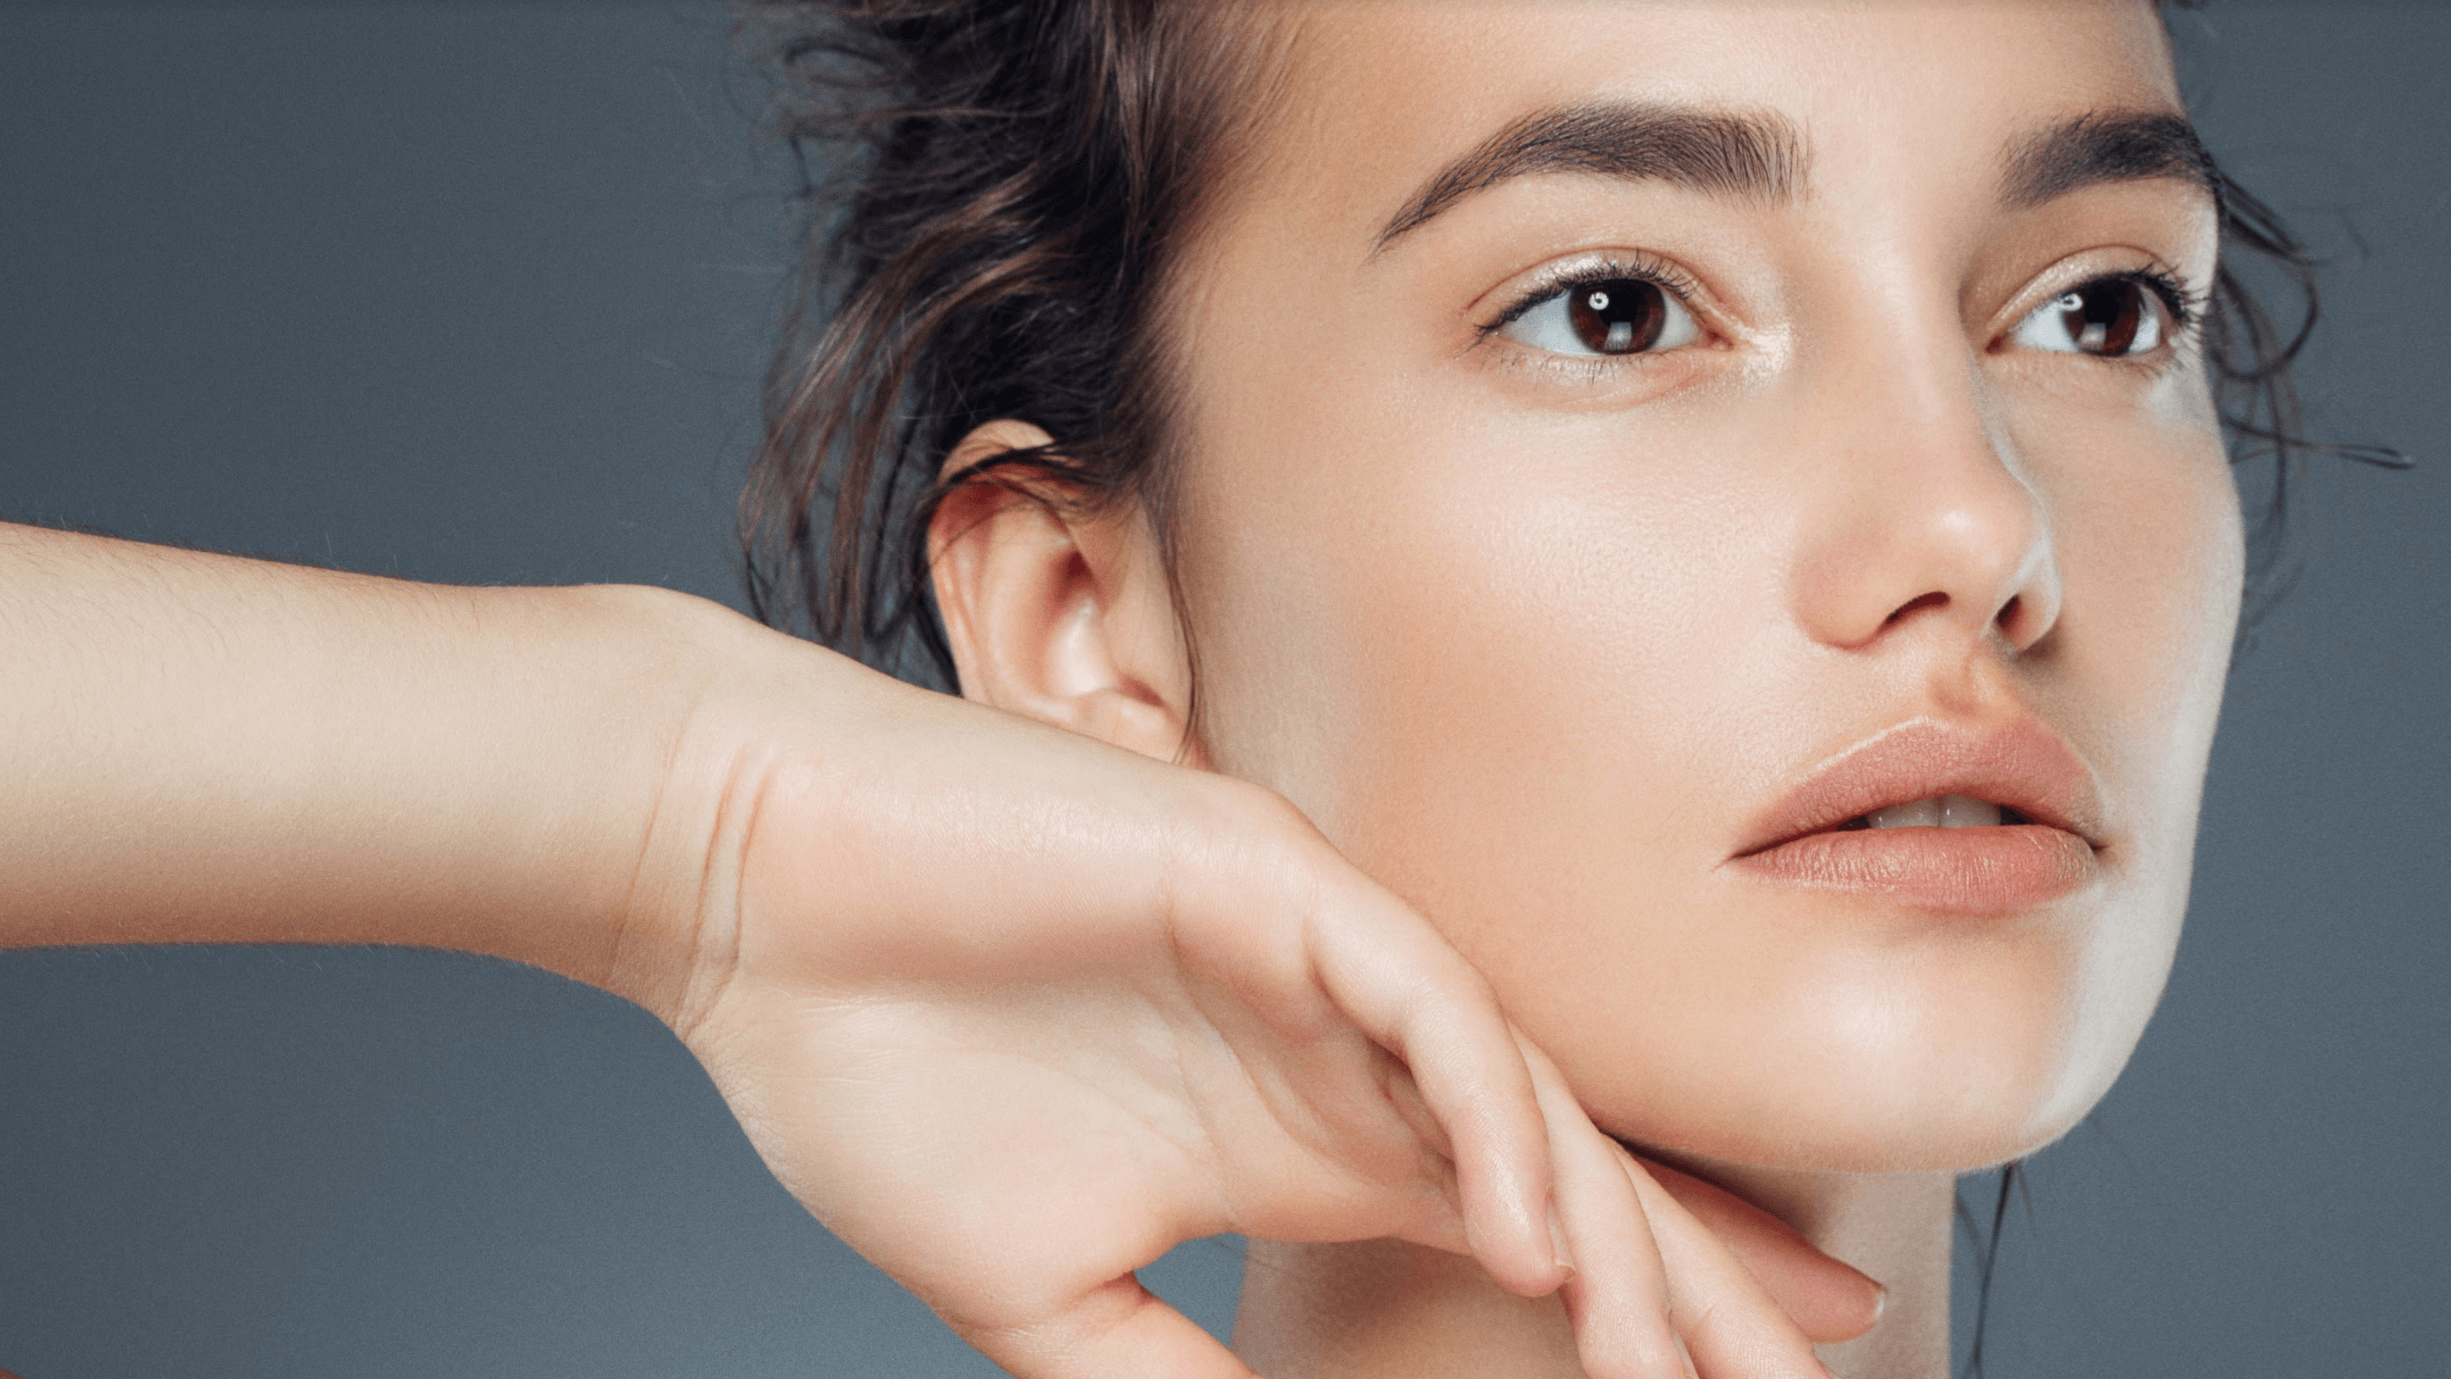 What is the Best Way to Reduce Swelling After Facelift Surgery?